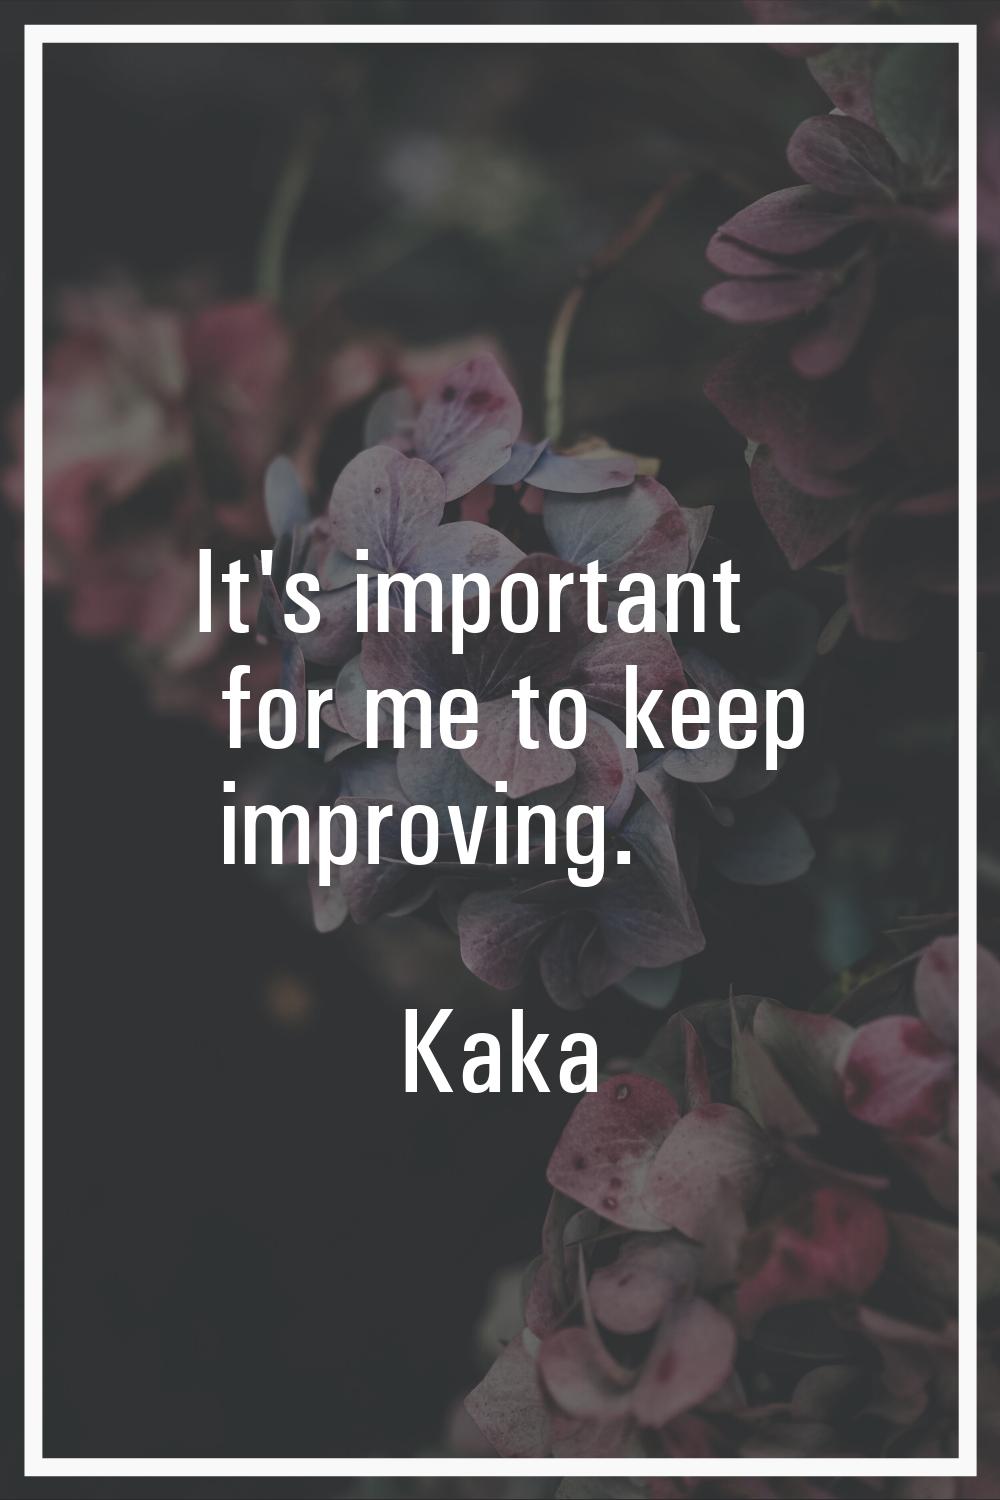 It's important for me to keep improving.